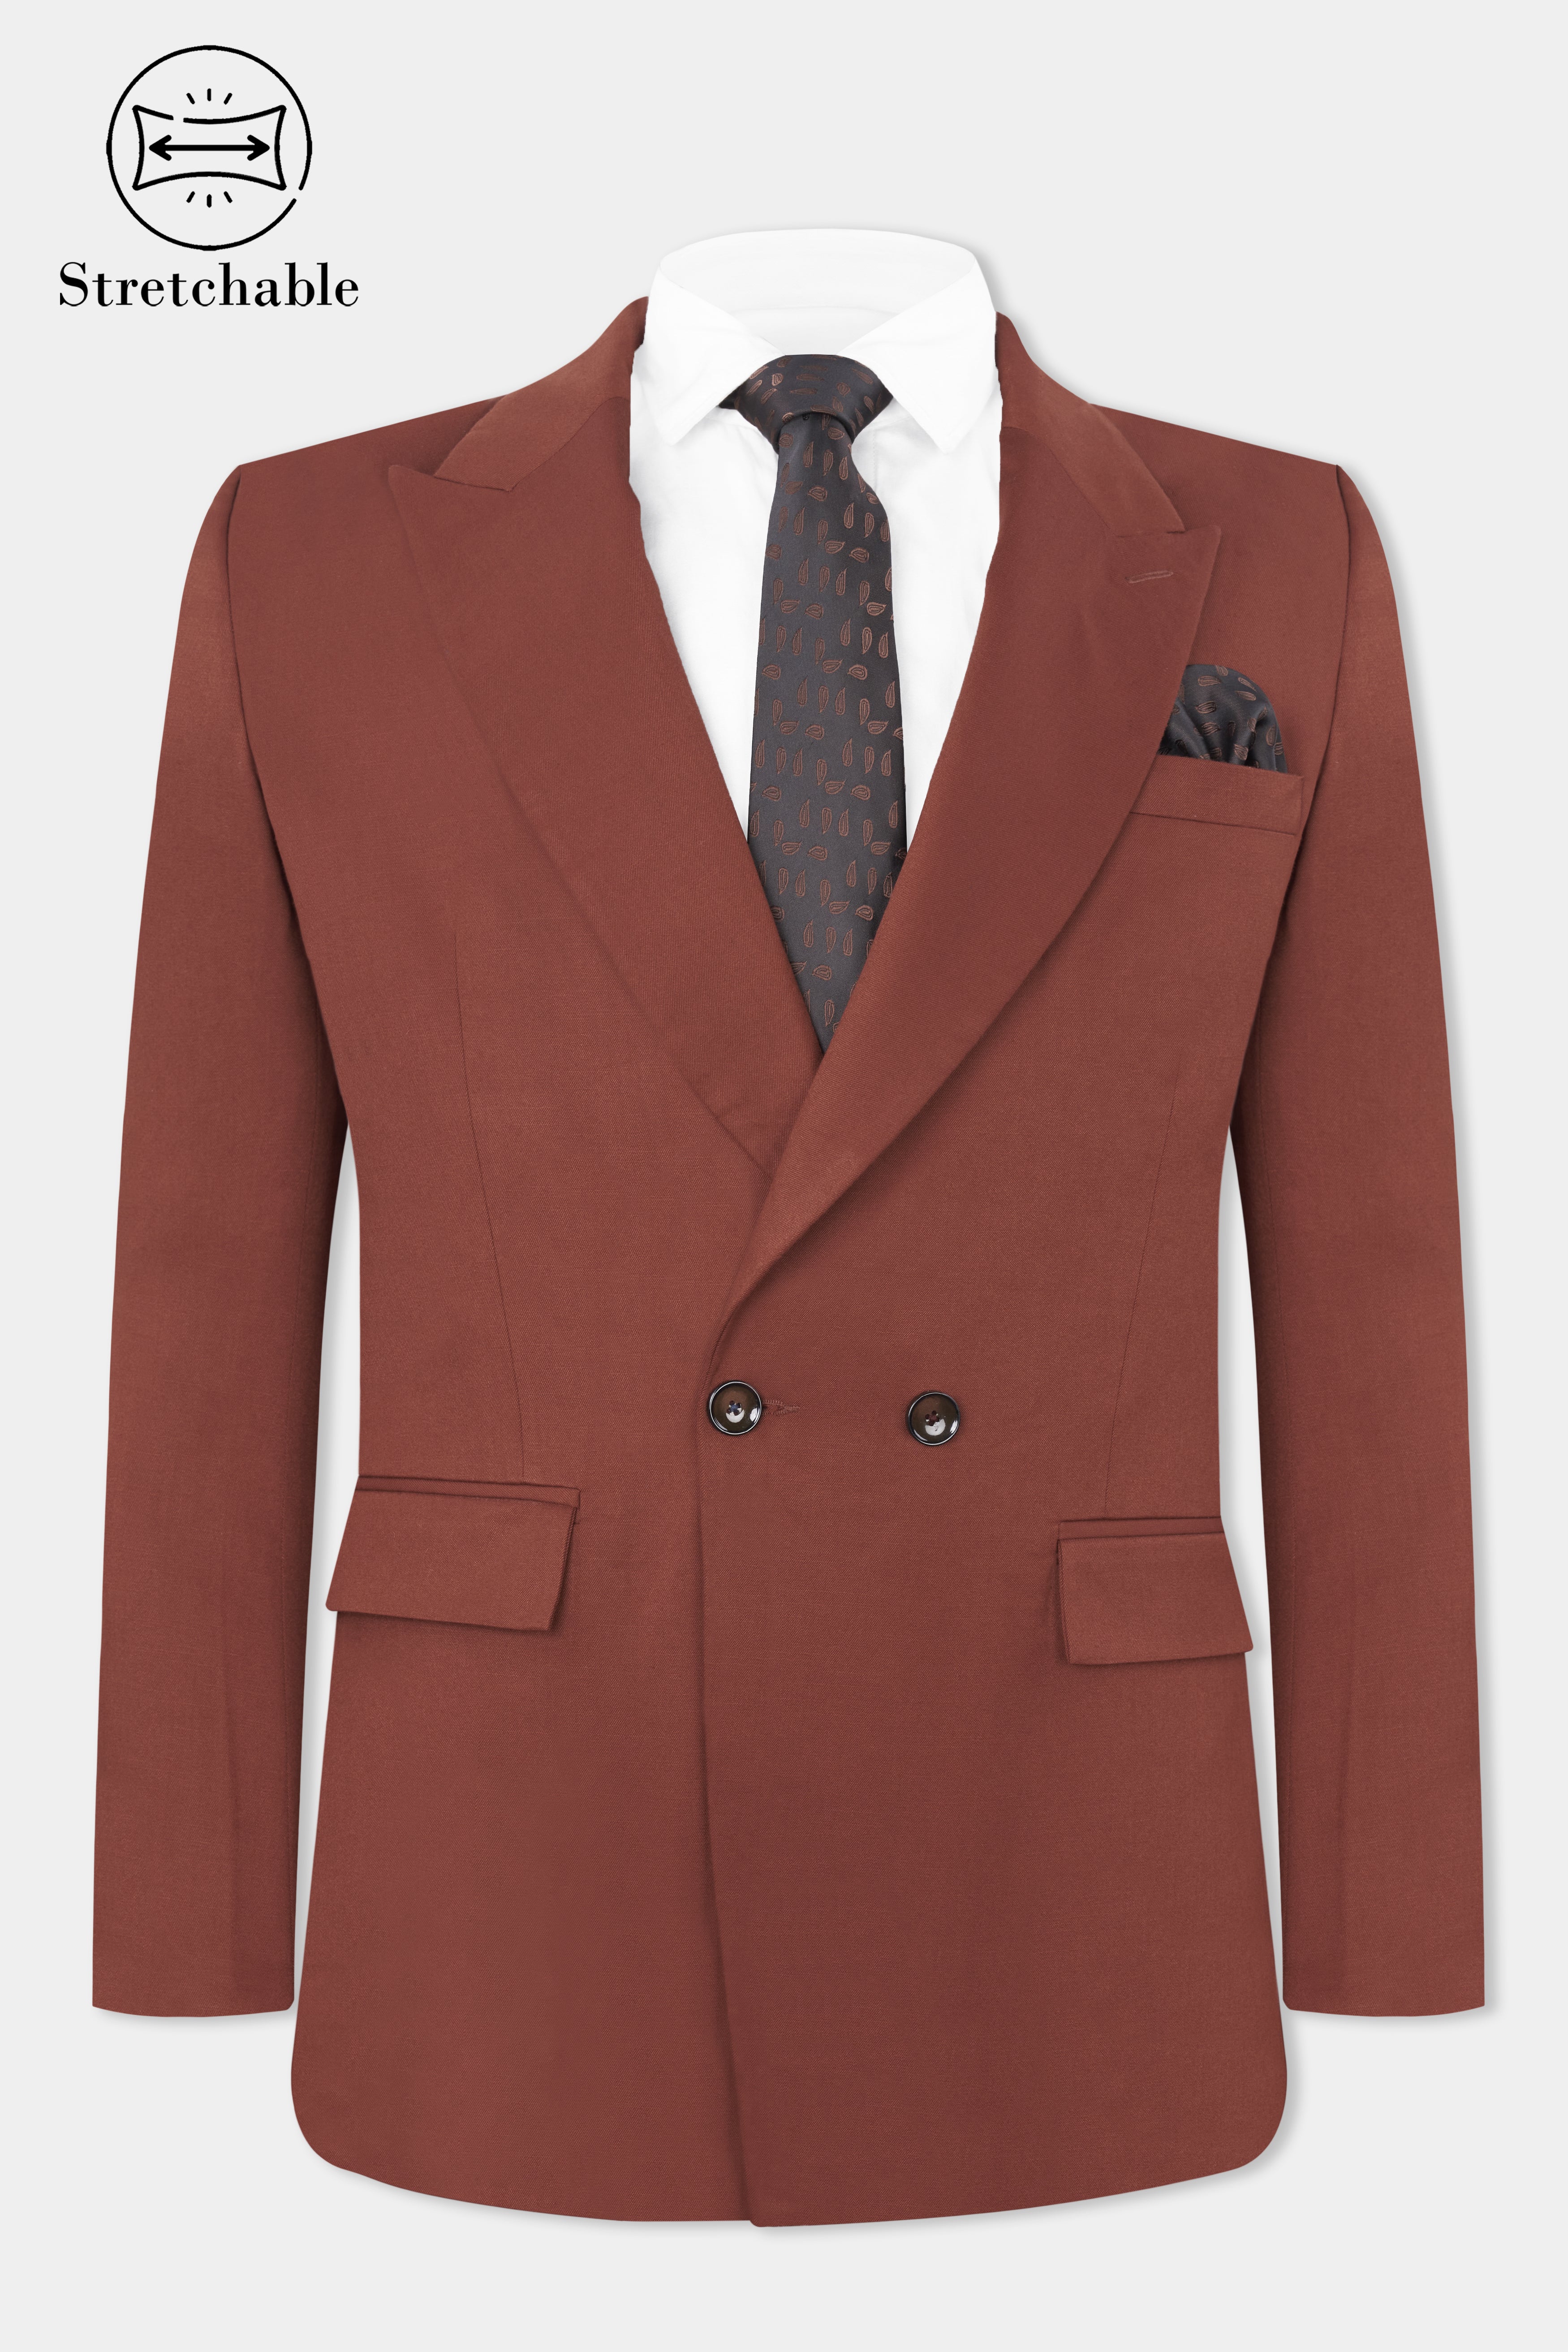 Ironstone Red Stretchable Double-Breasted traveler Blazer